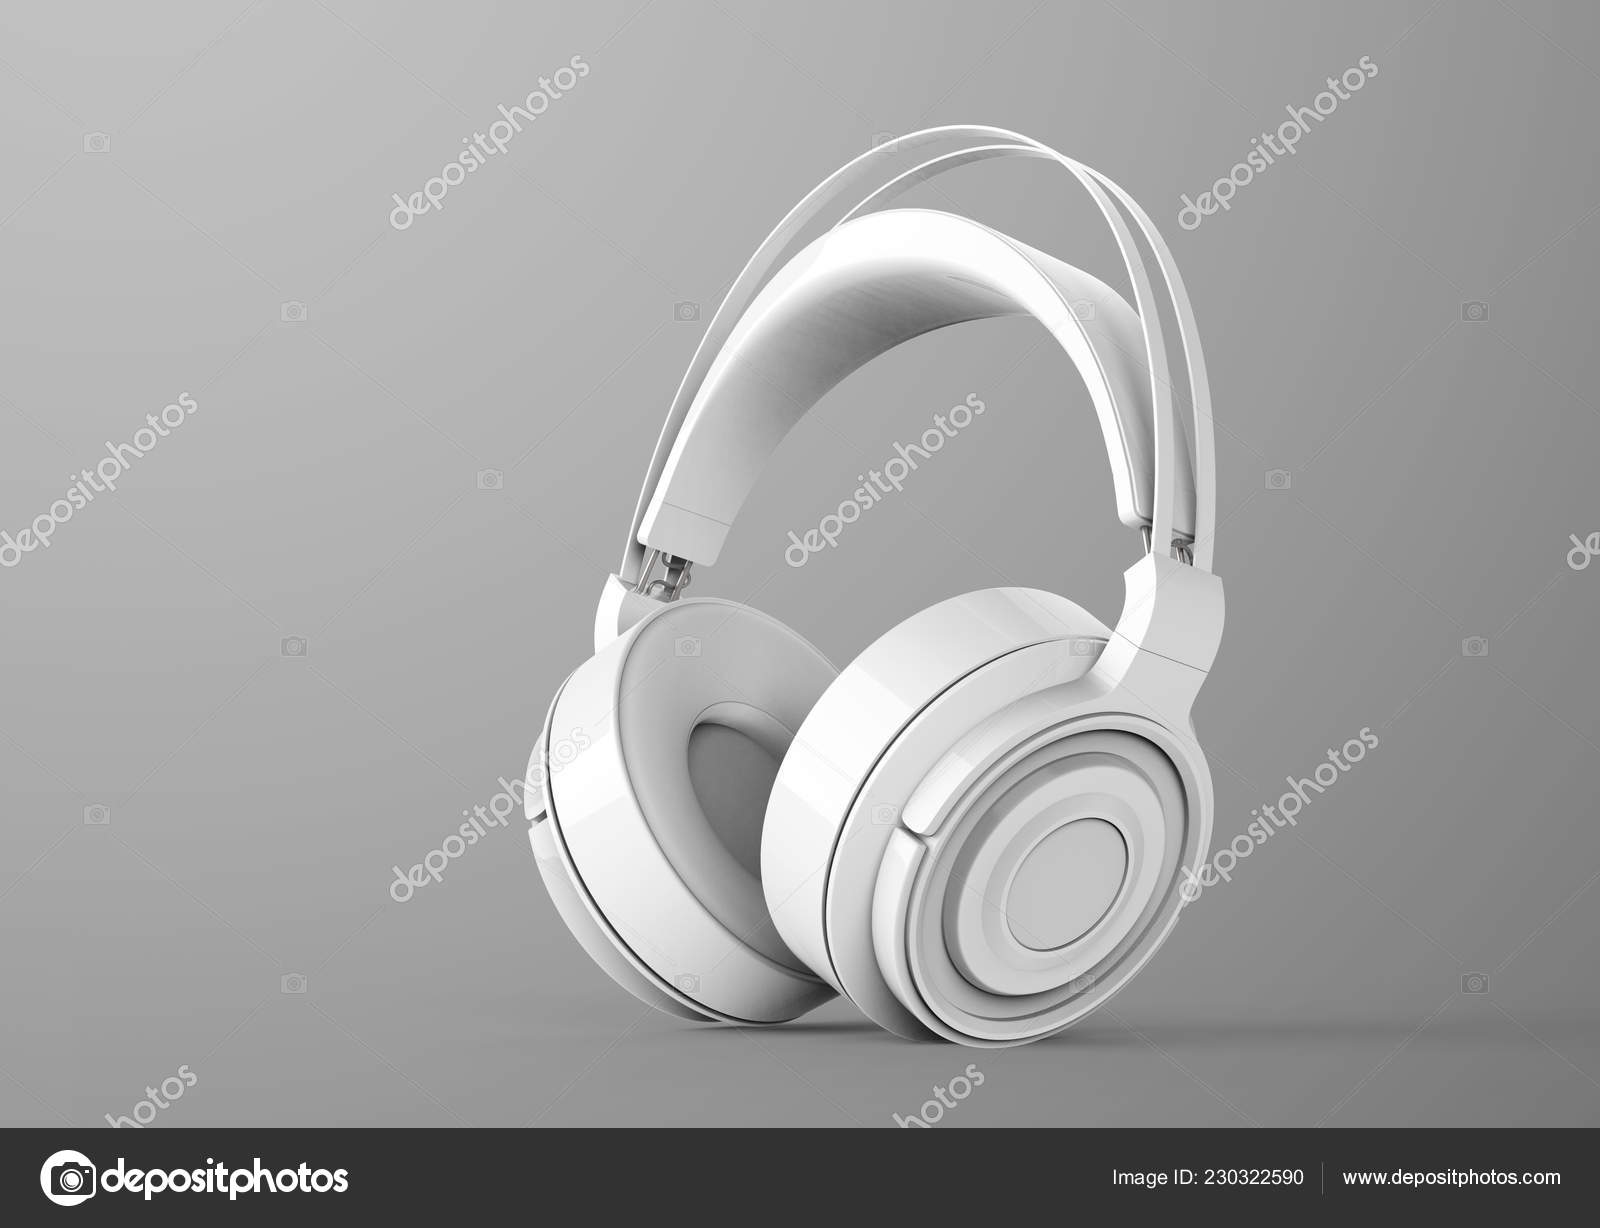 Download White Headphone Mockup Rendering Grey Background Stock Photo By C Hstrongart 230322590